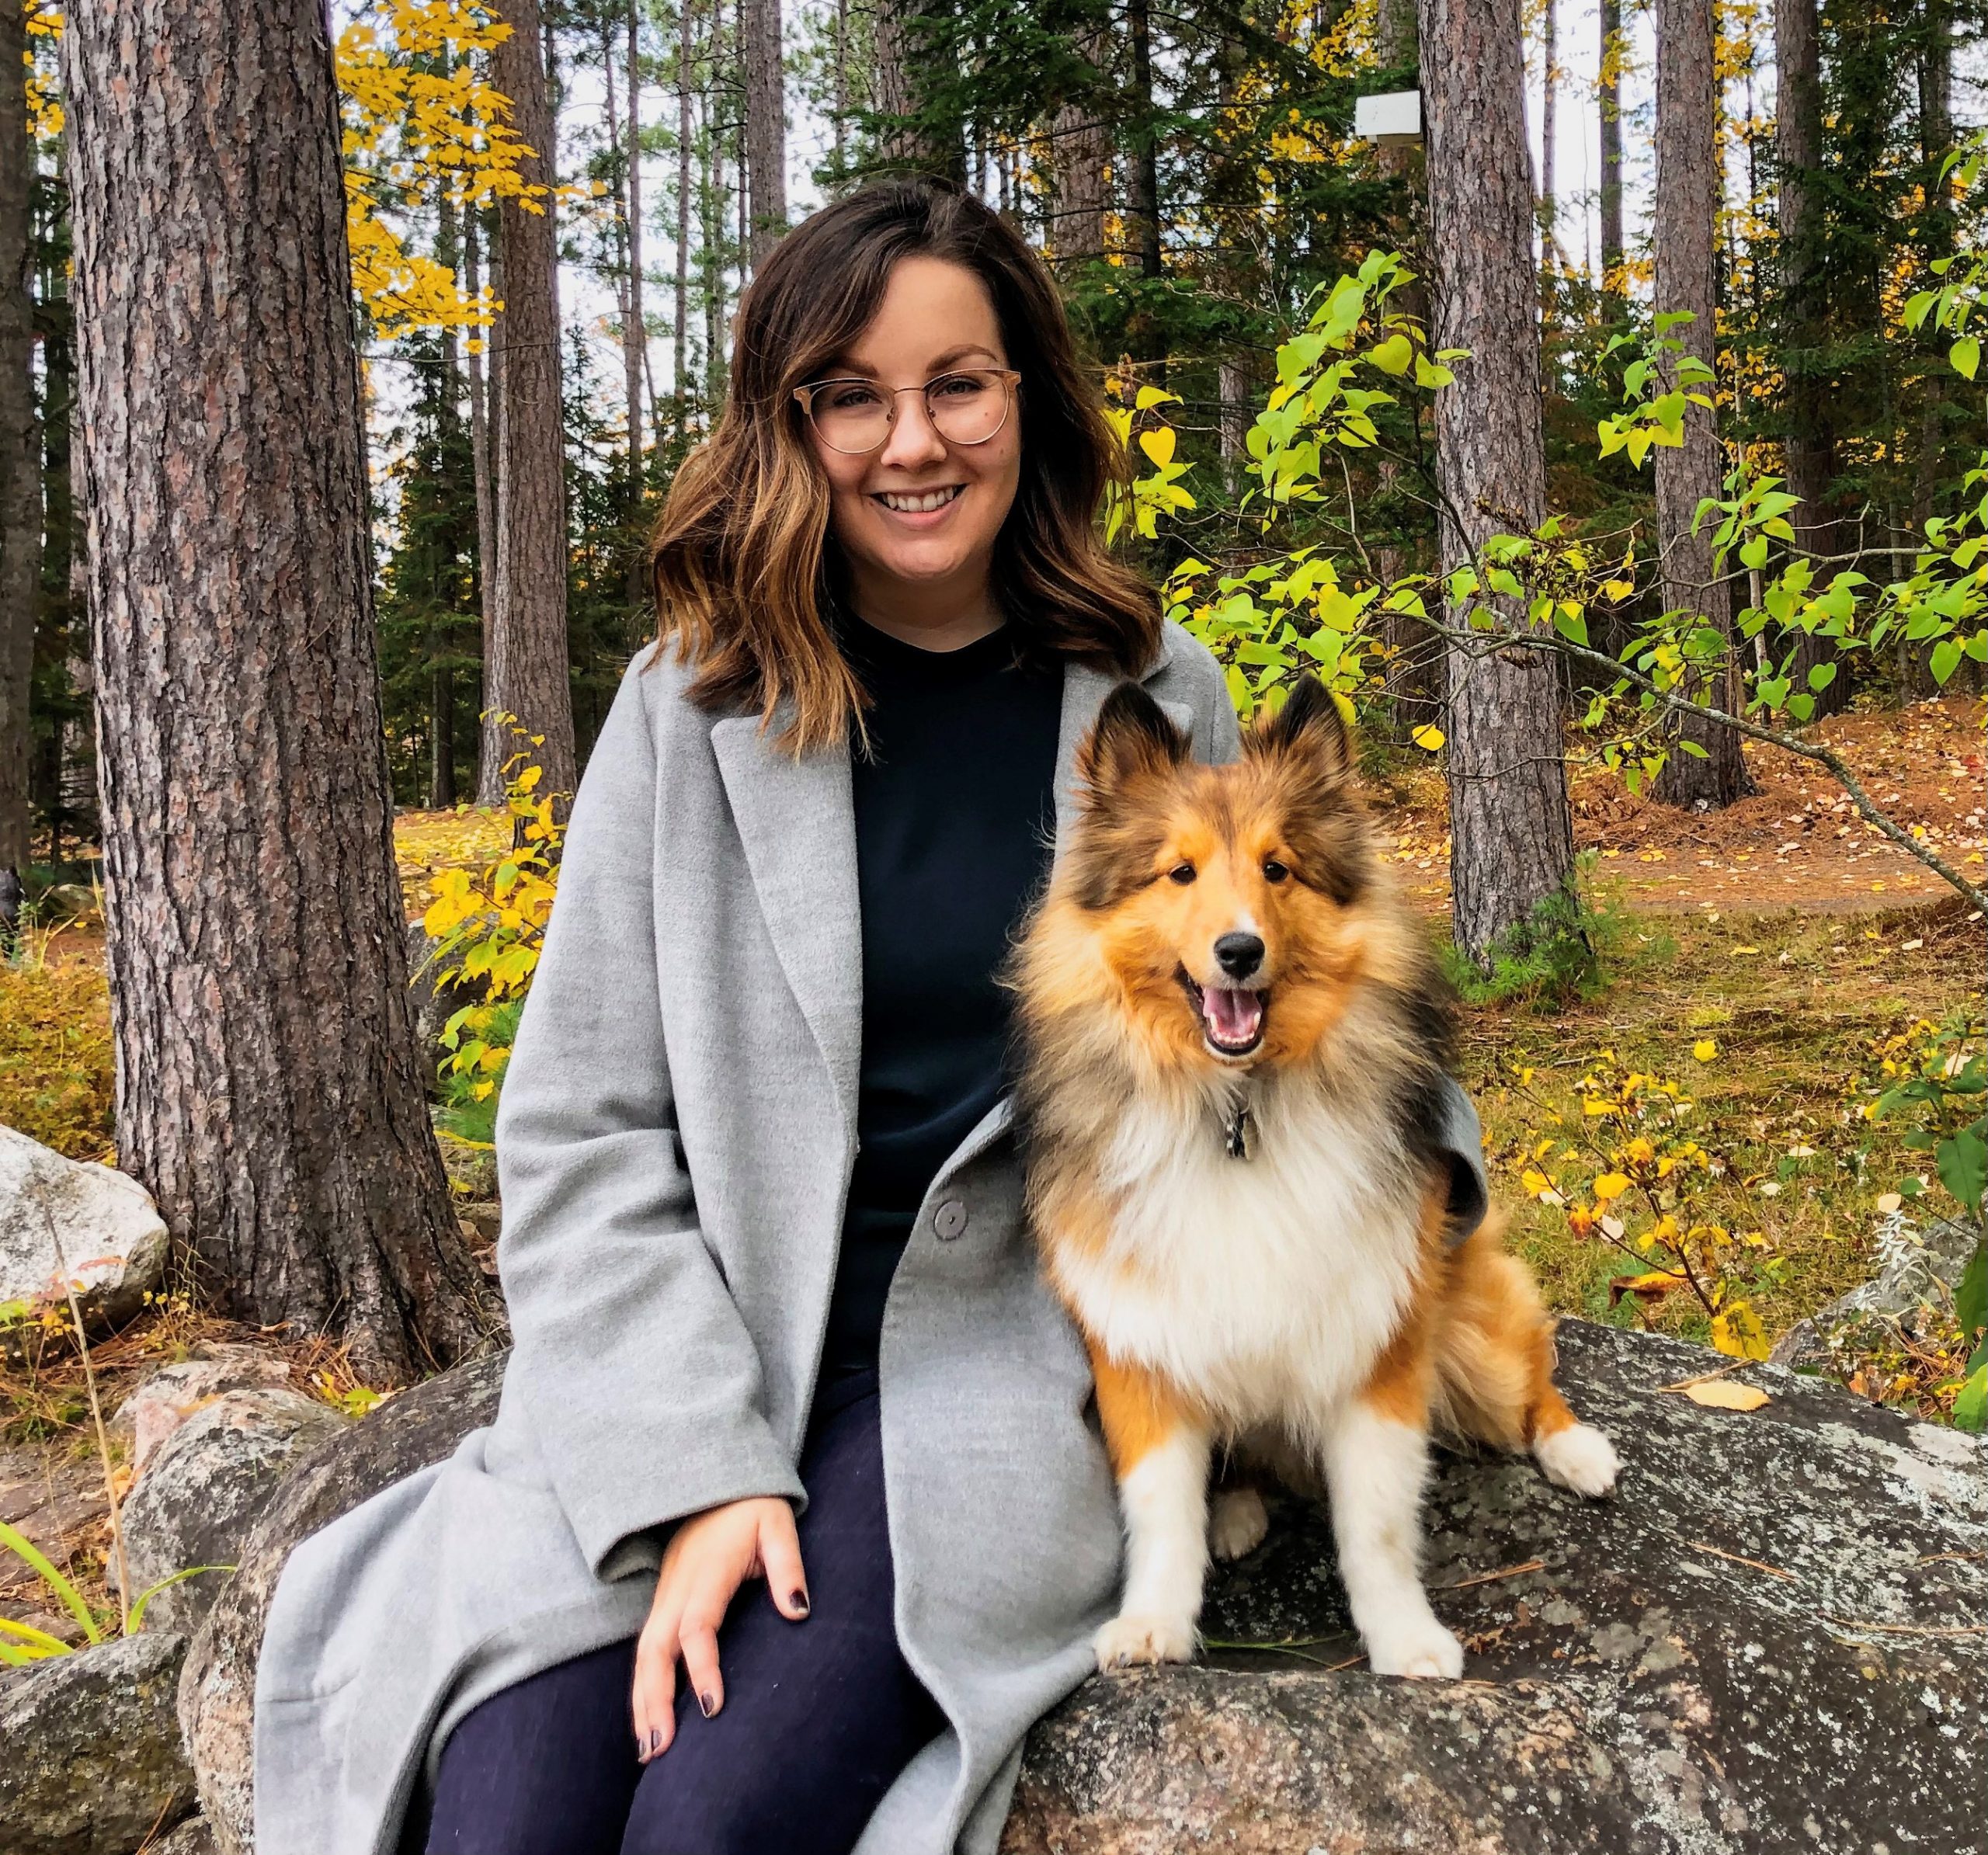 Sara is wearing a grey coat and is sitting on a rock, in front of trees, with her dog. Sara is smiling into the camera.